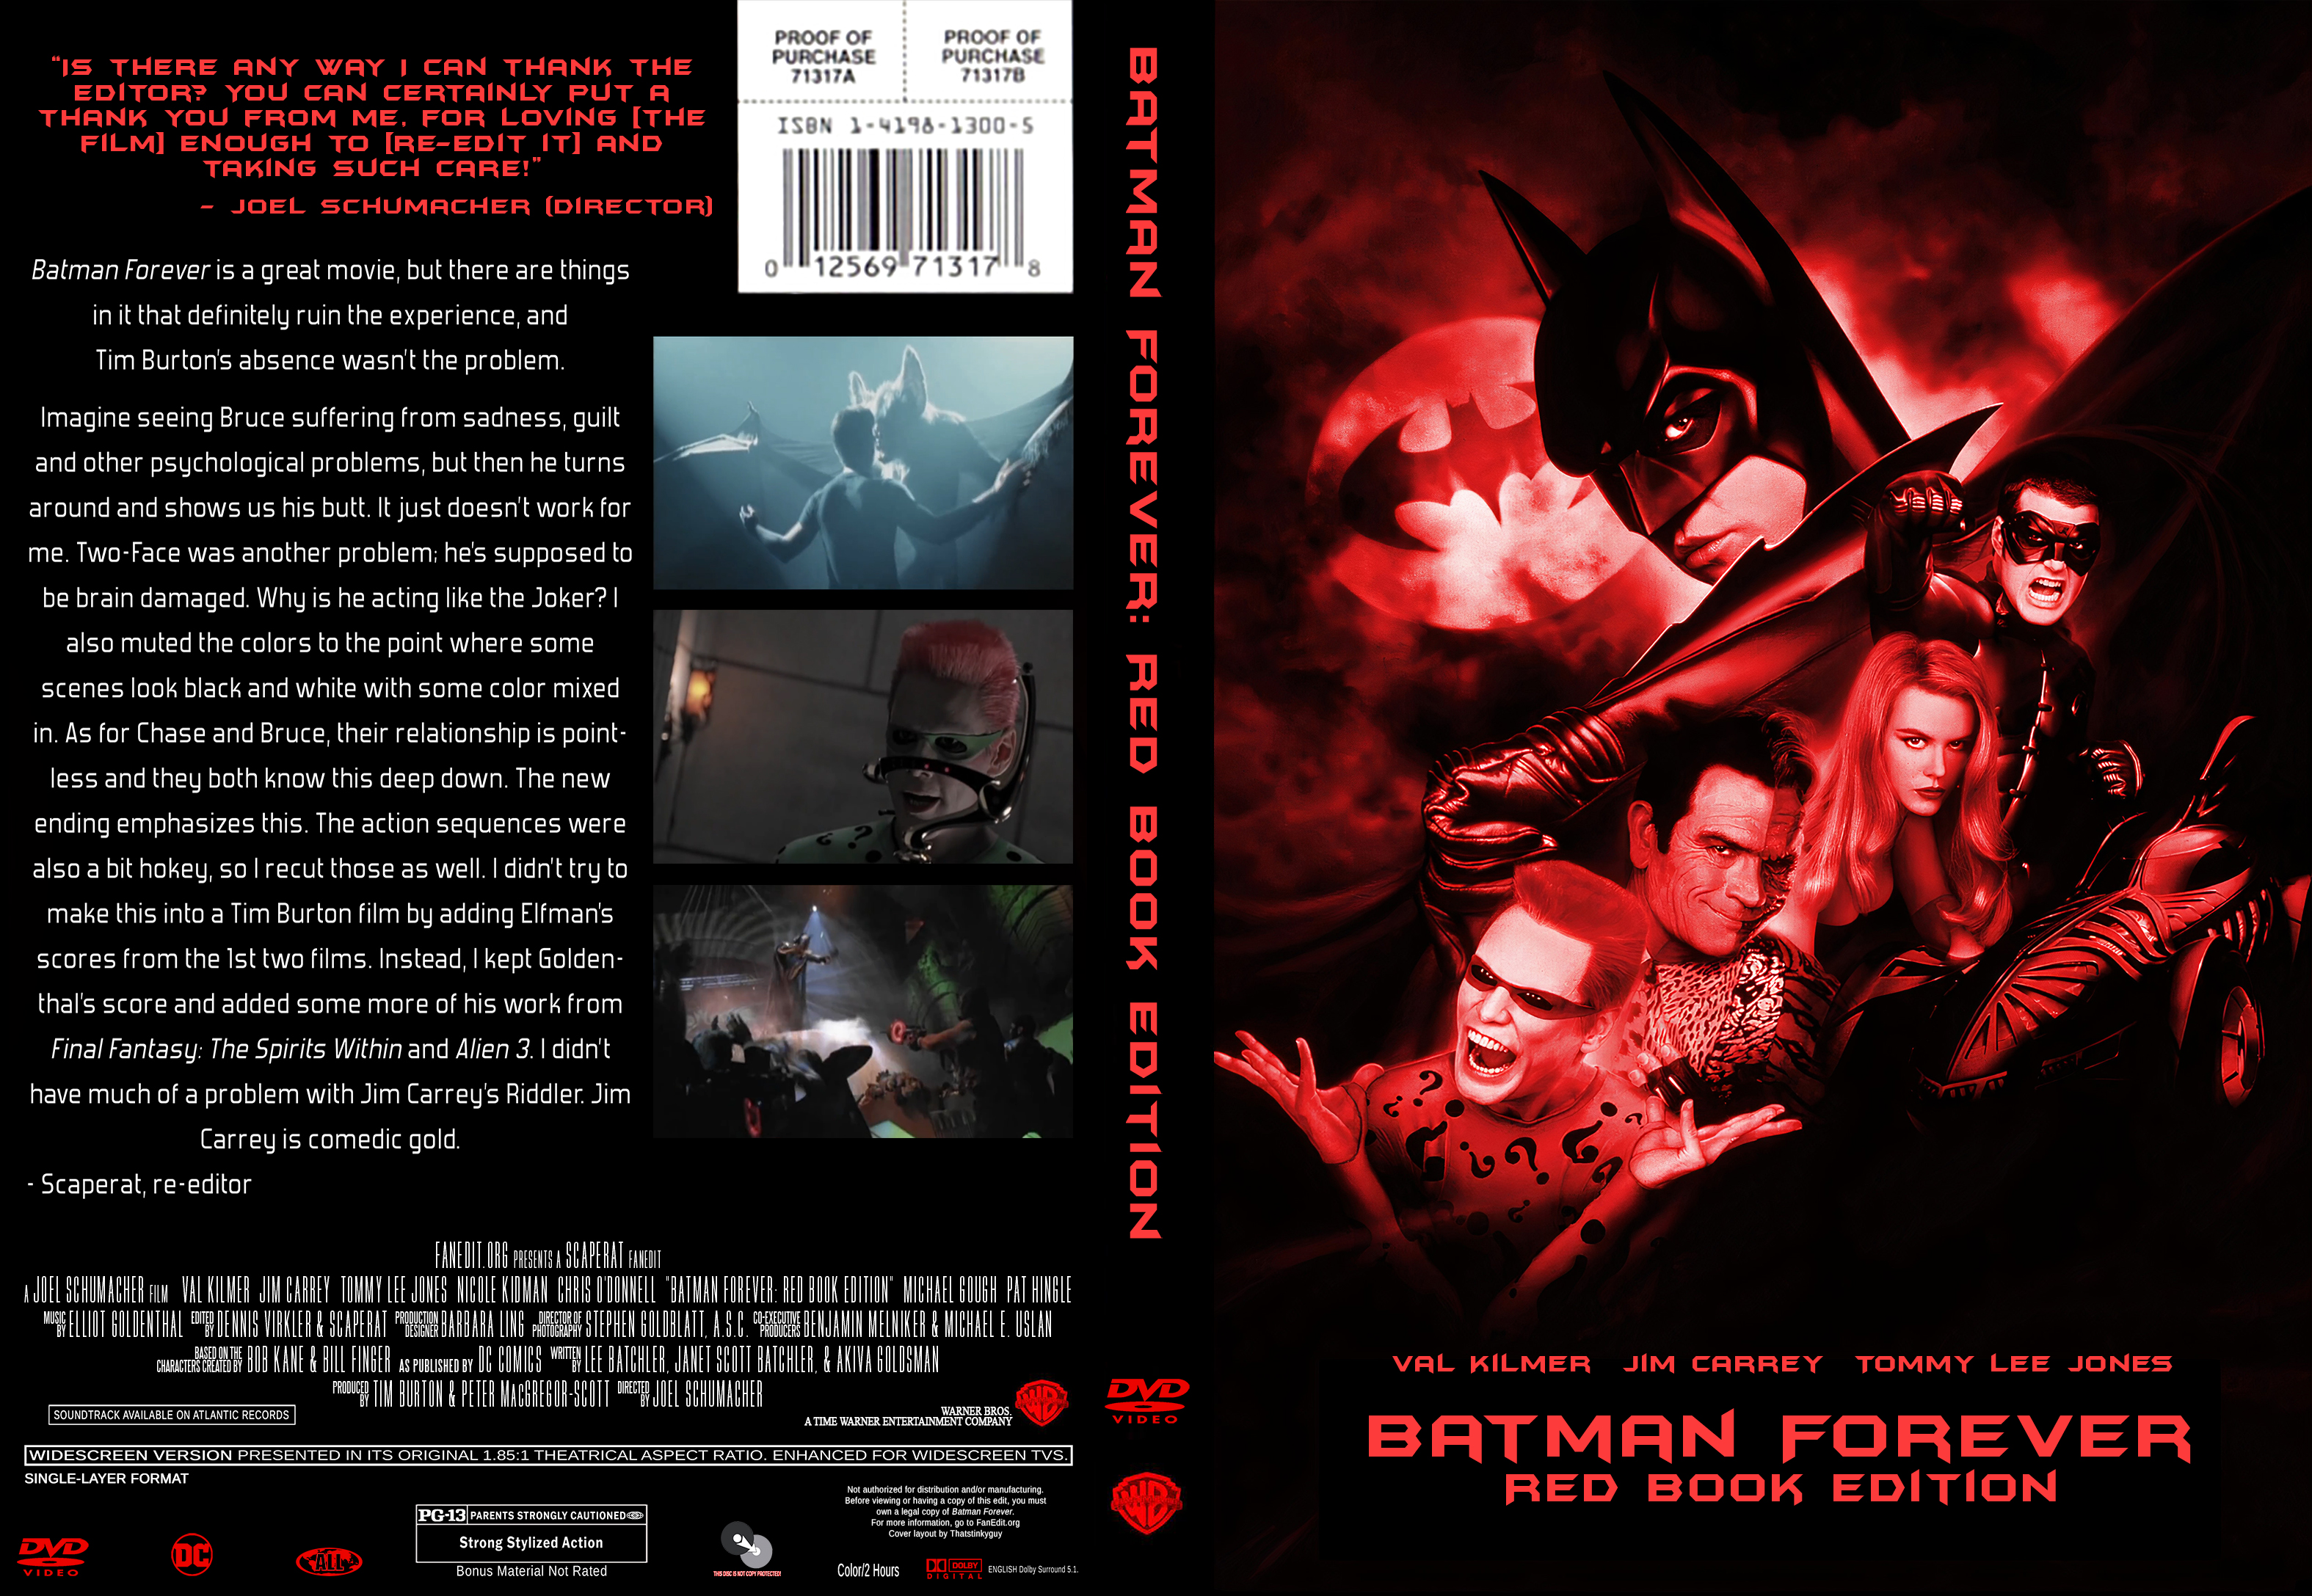 Batman Forever Red Book Edition DVD cover    Forums